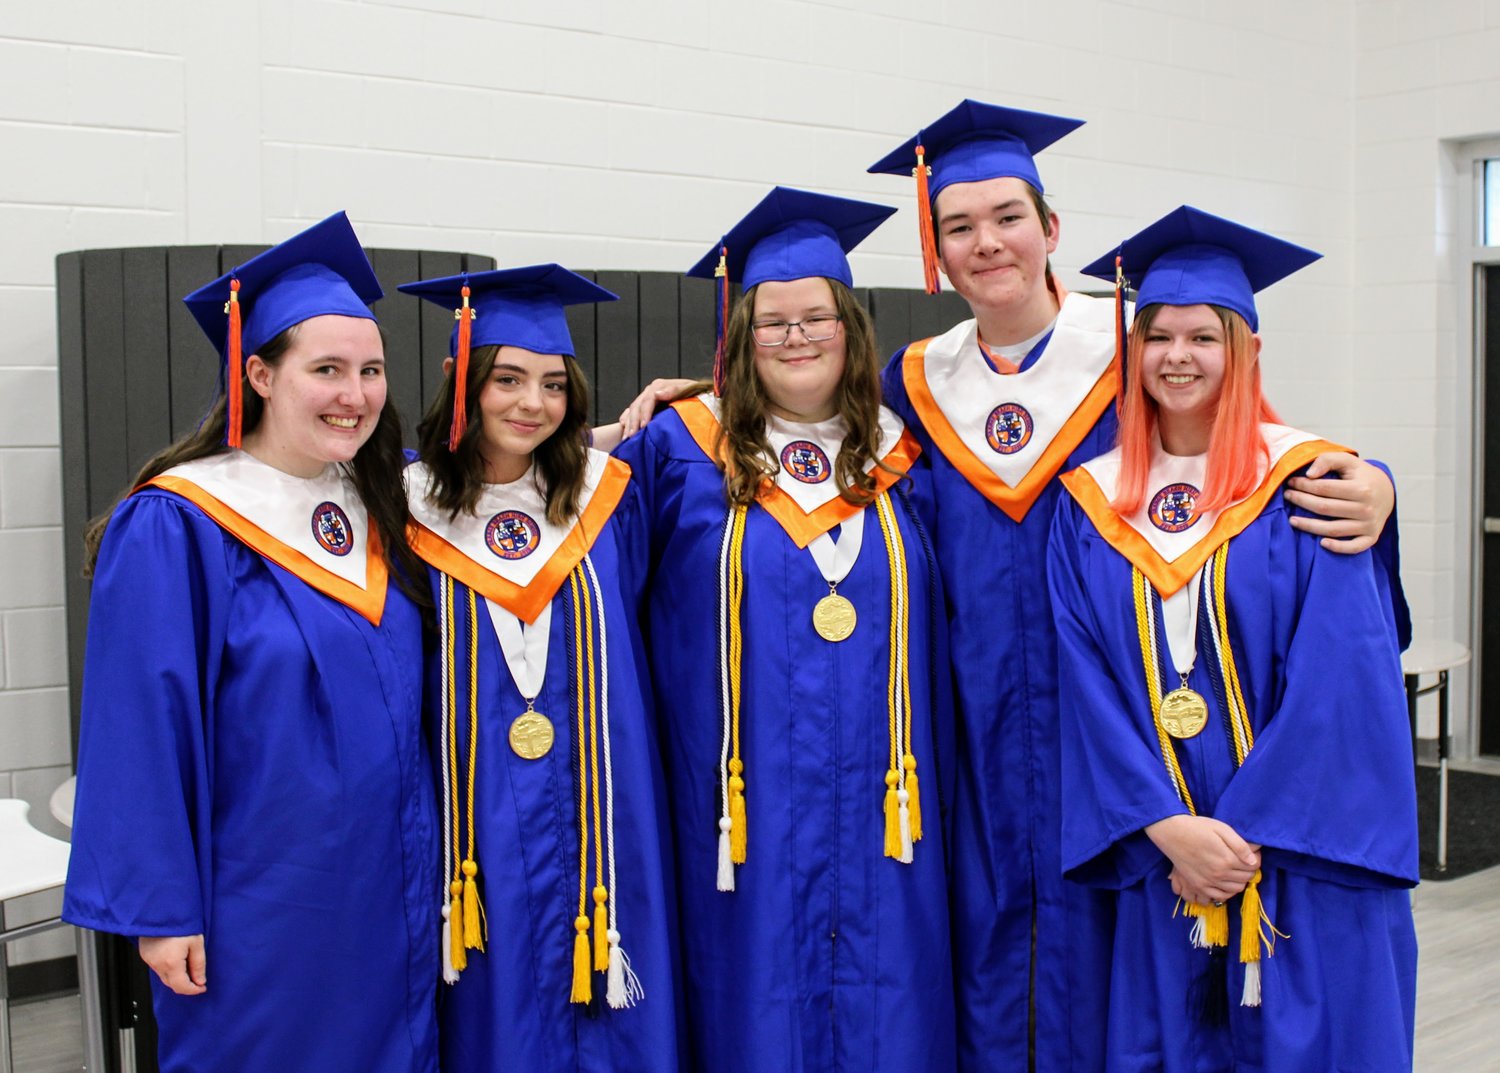 The Orange Beach High School class of 2022 celebrated their graduation May 17 at the Orange Beach Performing Arts Center.